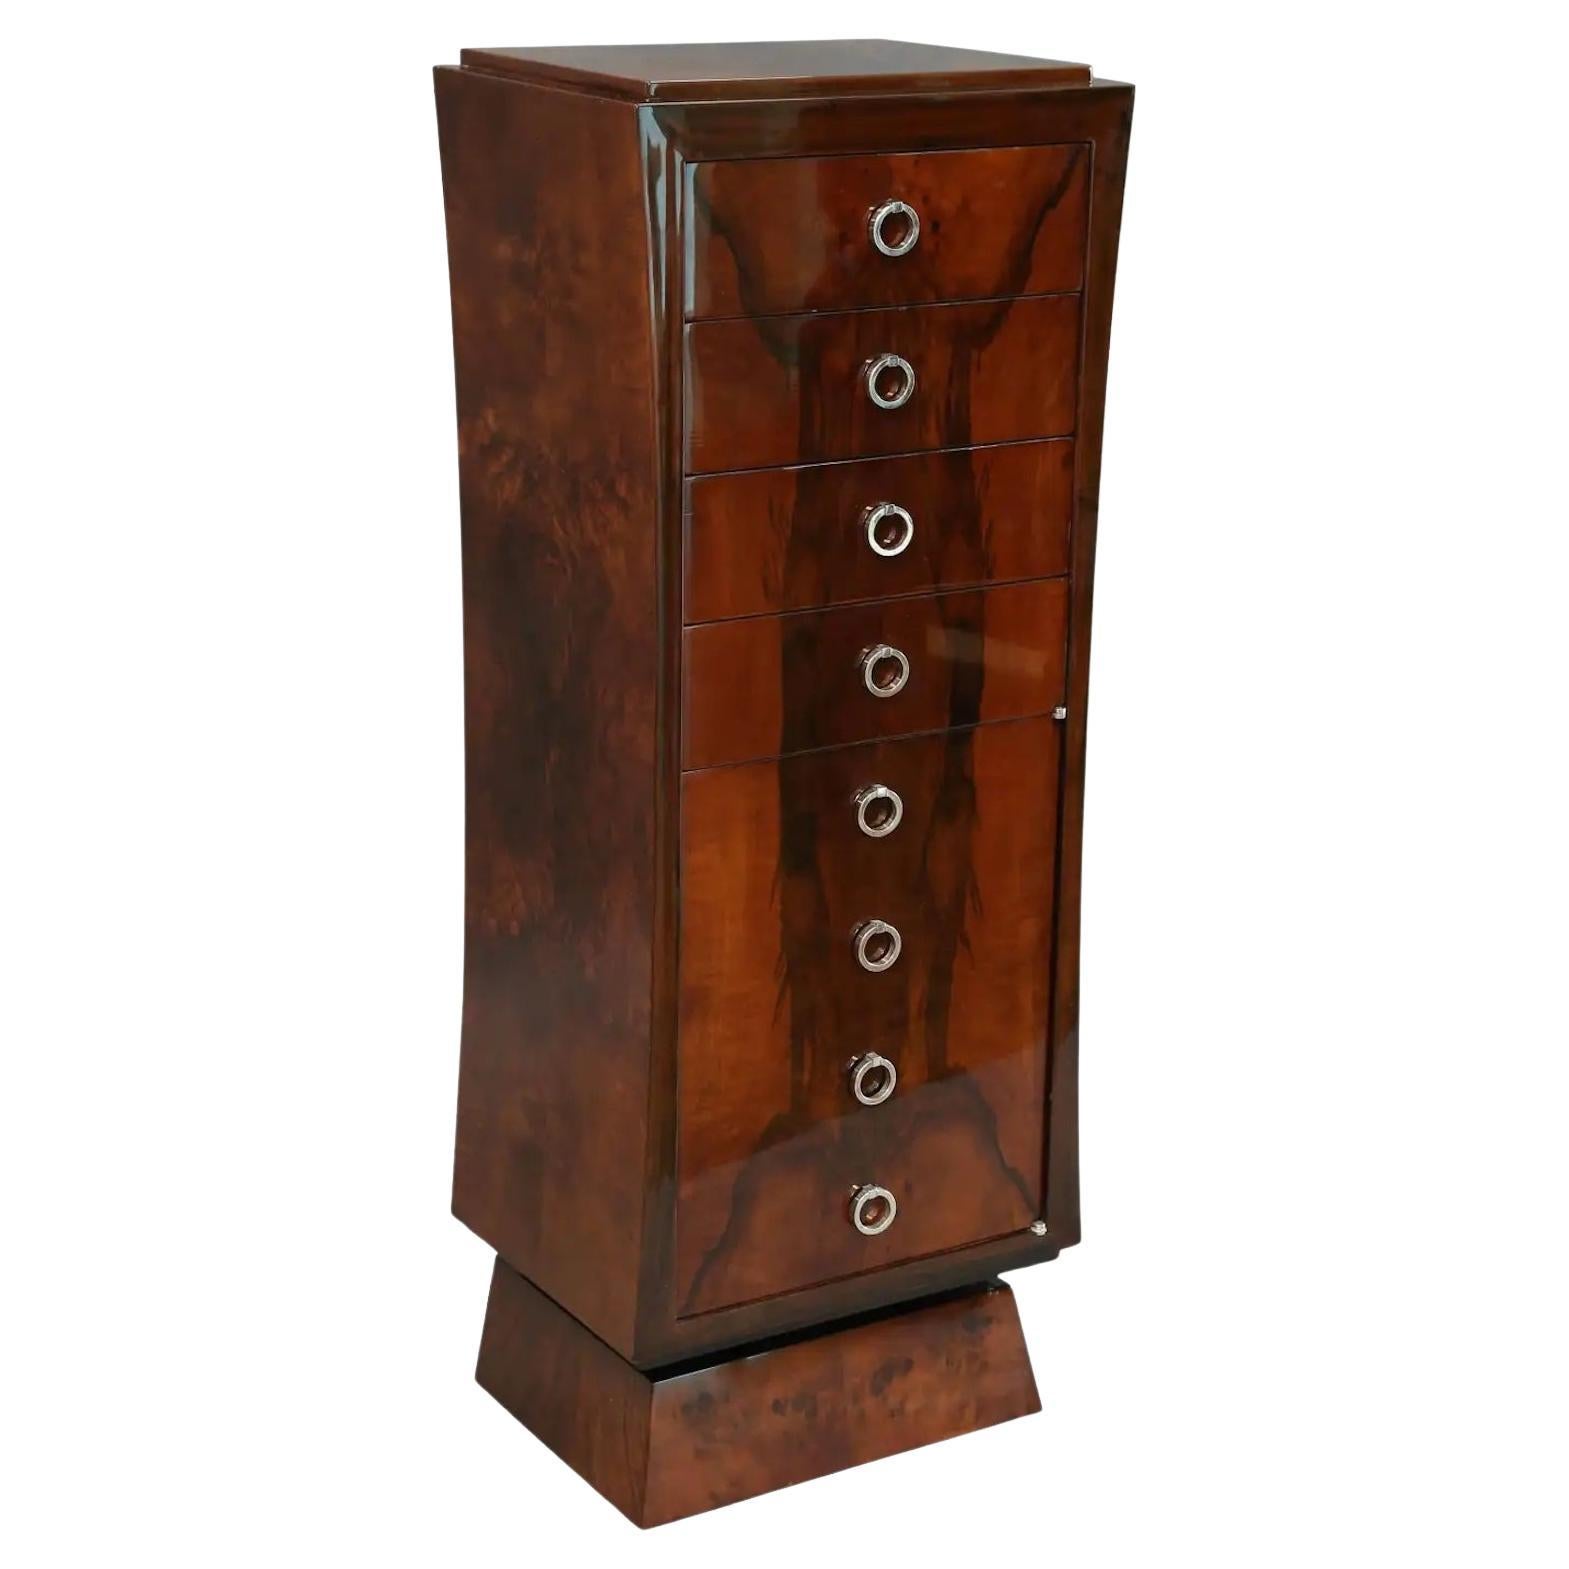  Hungarian Art Deco Chest of Drawers in Walnut For Sale